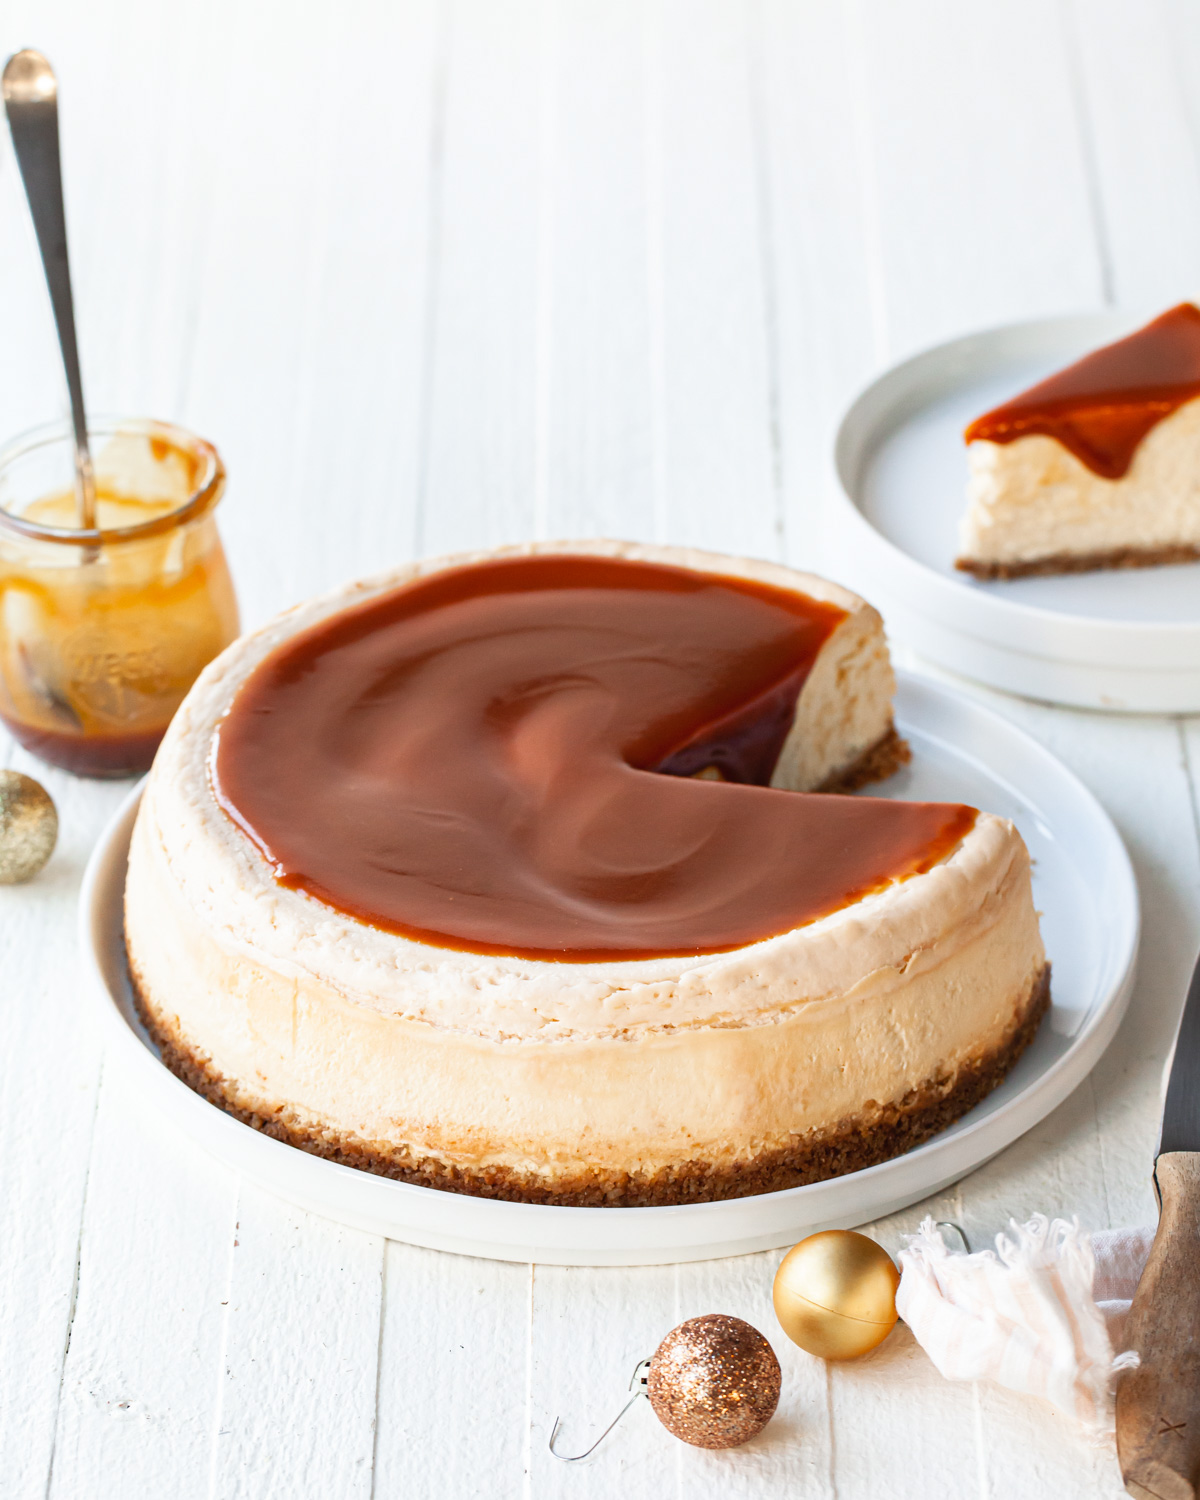 A baked and sliced caramel cheesecake